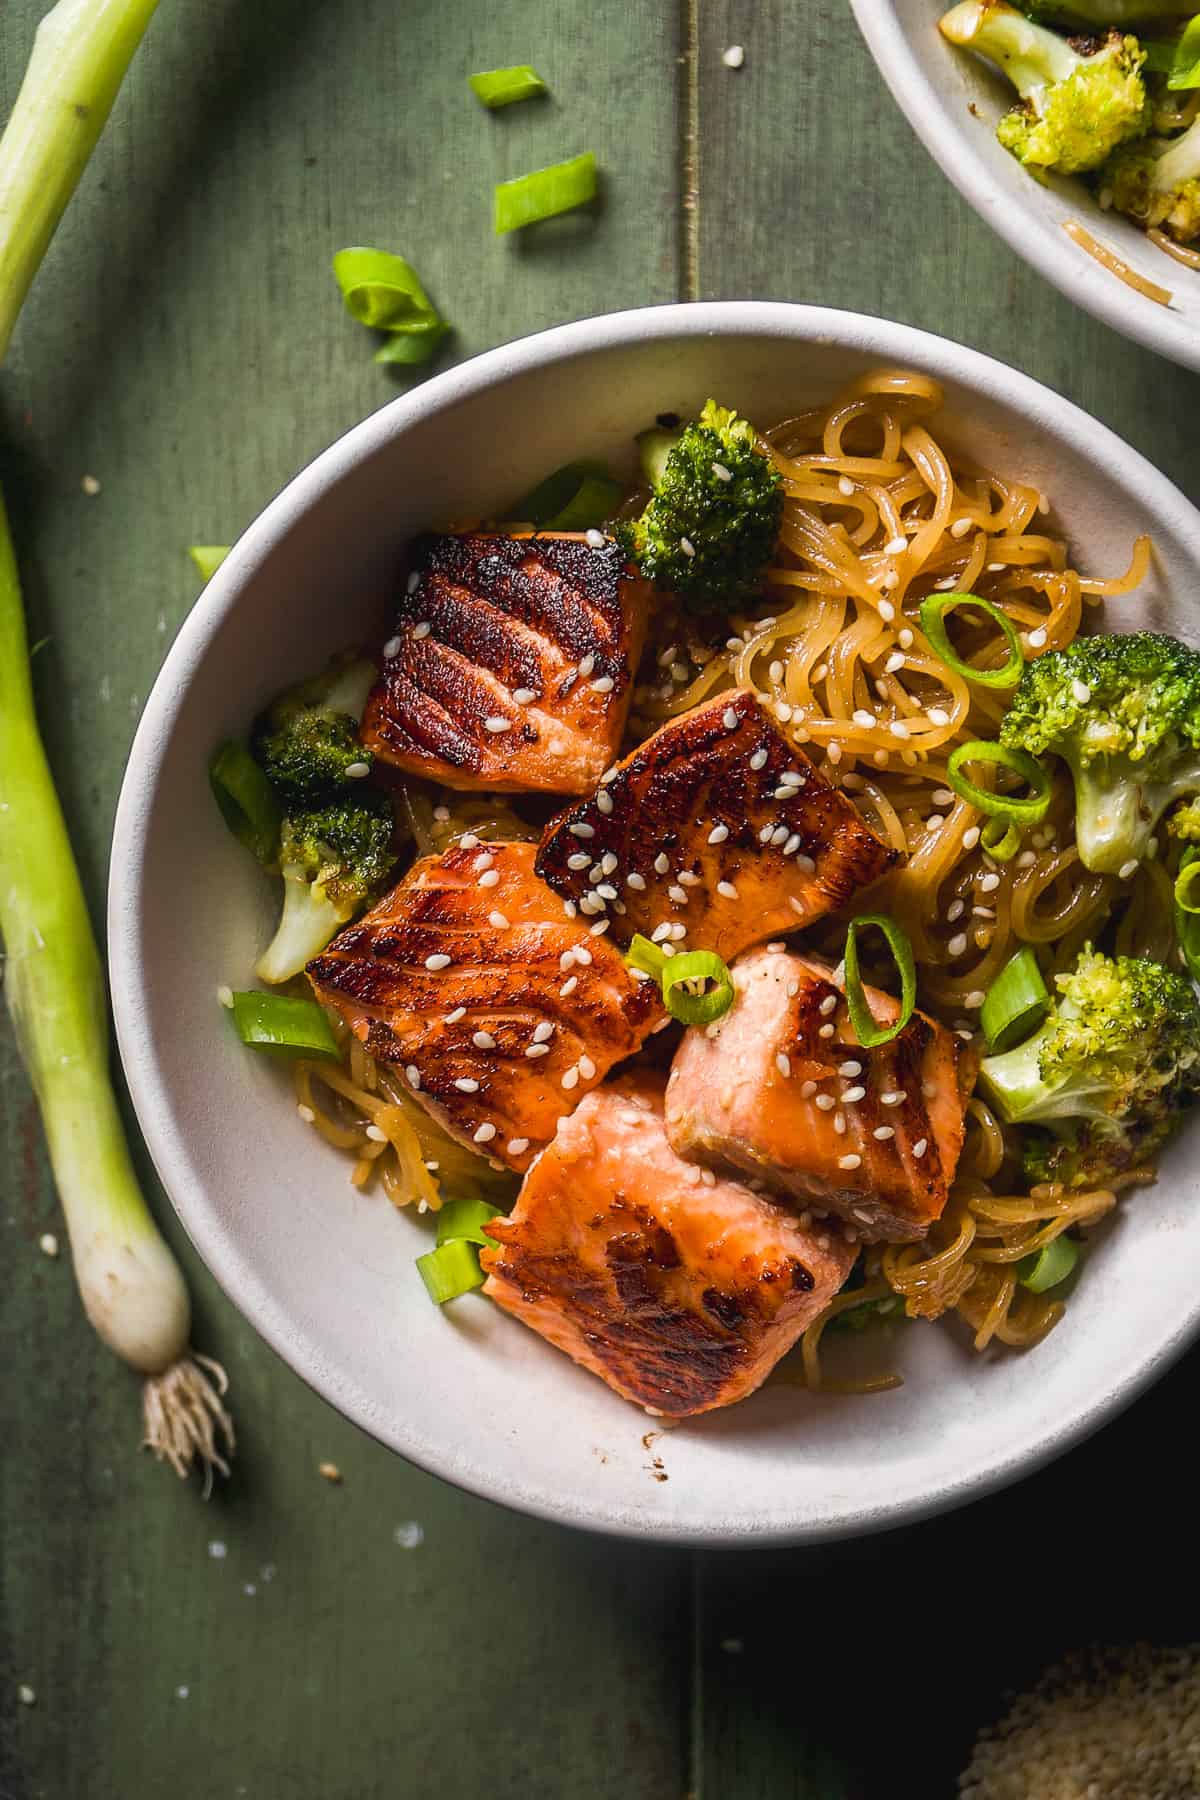 Overhead view of a bowl of teriyaki noodles with salmon bites on top.